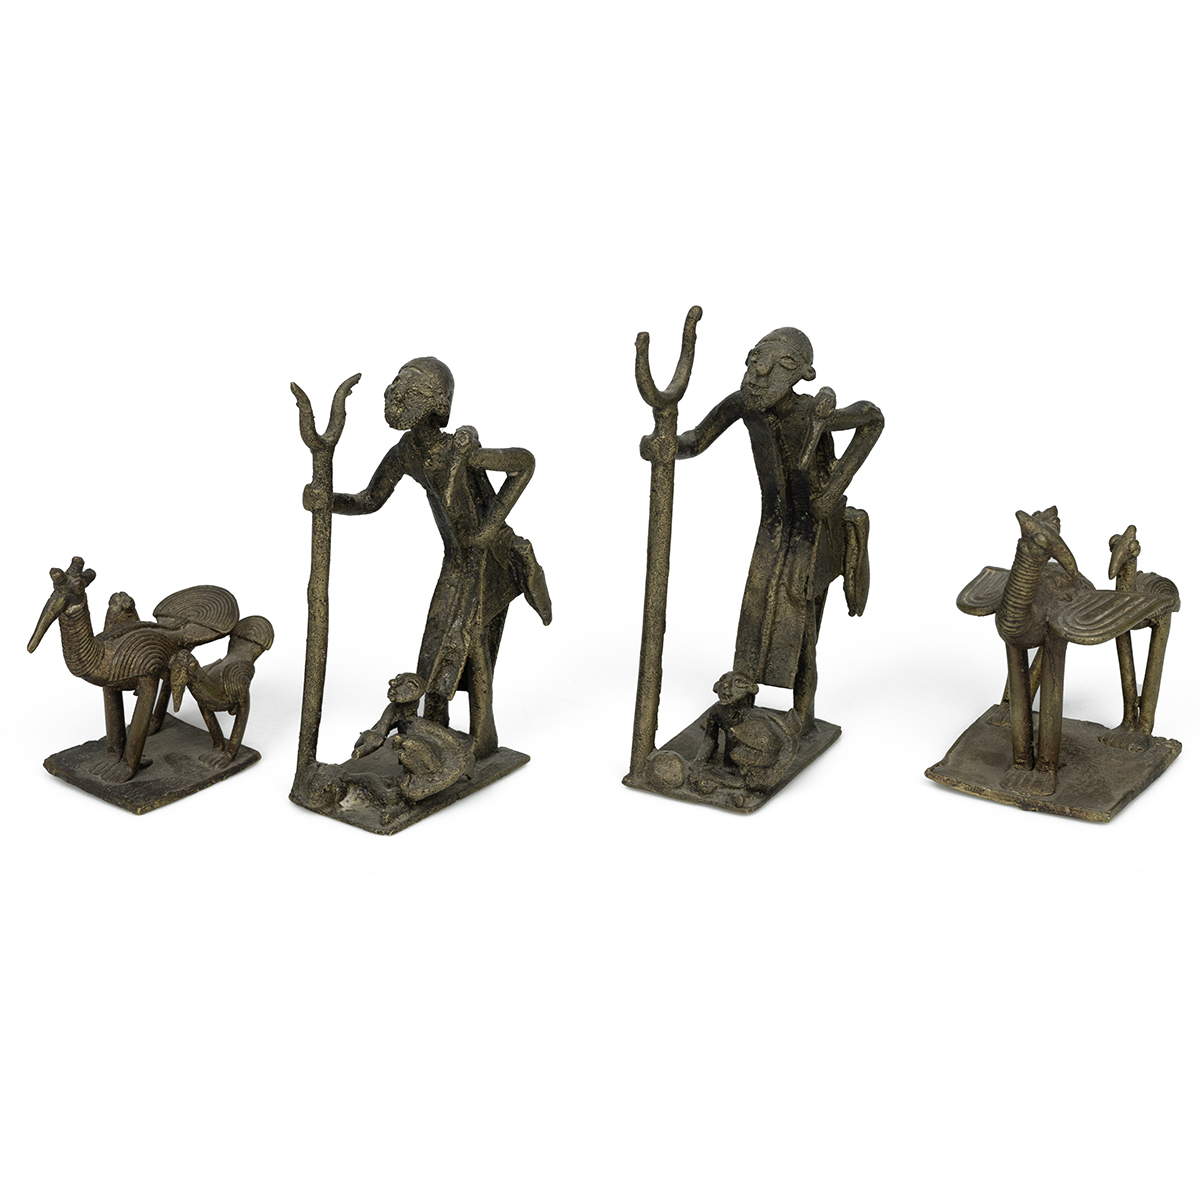 Collection of African metal figurines - cultural and erotic - height up to 12cm. (8) - Image 2 of 2